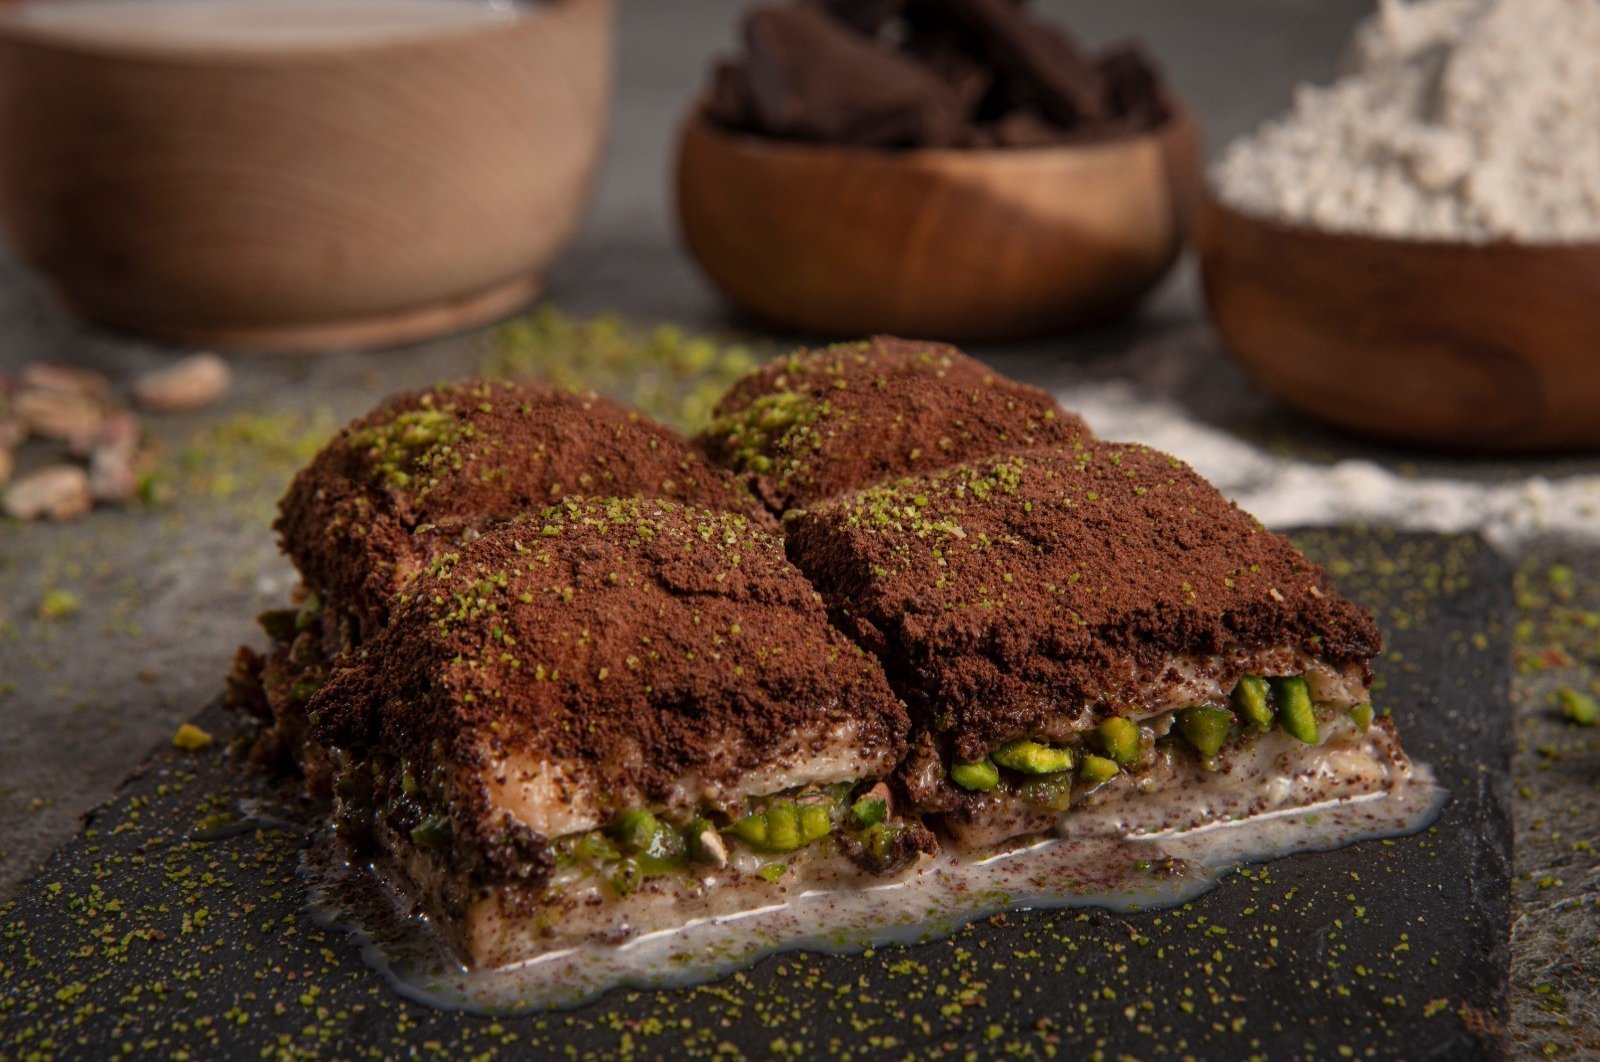 Cold baklava is among the desserts that have seen sales skyrocket on the eve of Qurban Bayram. (IHA Photo)